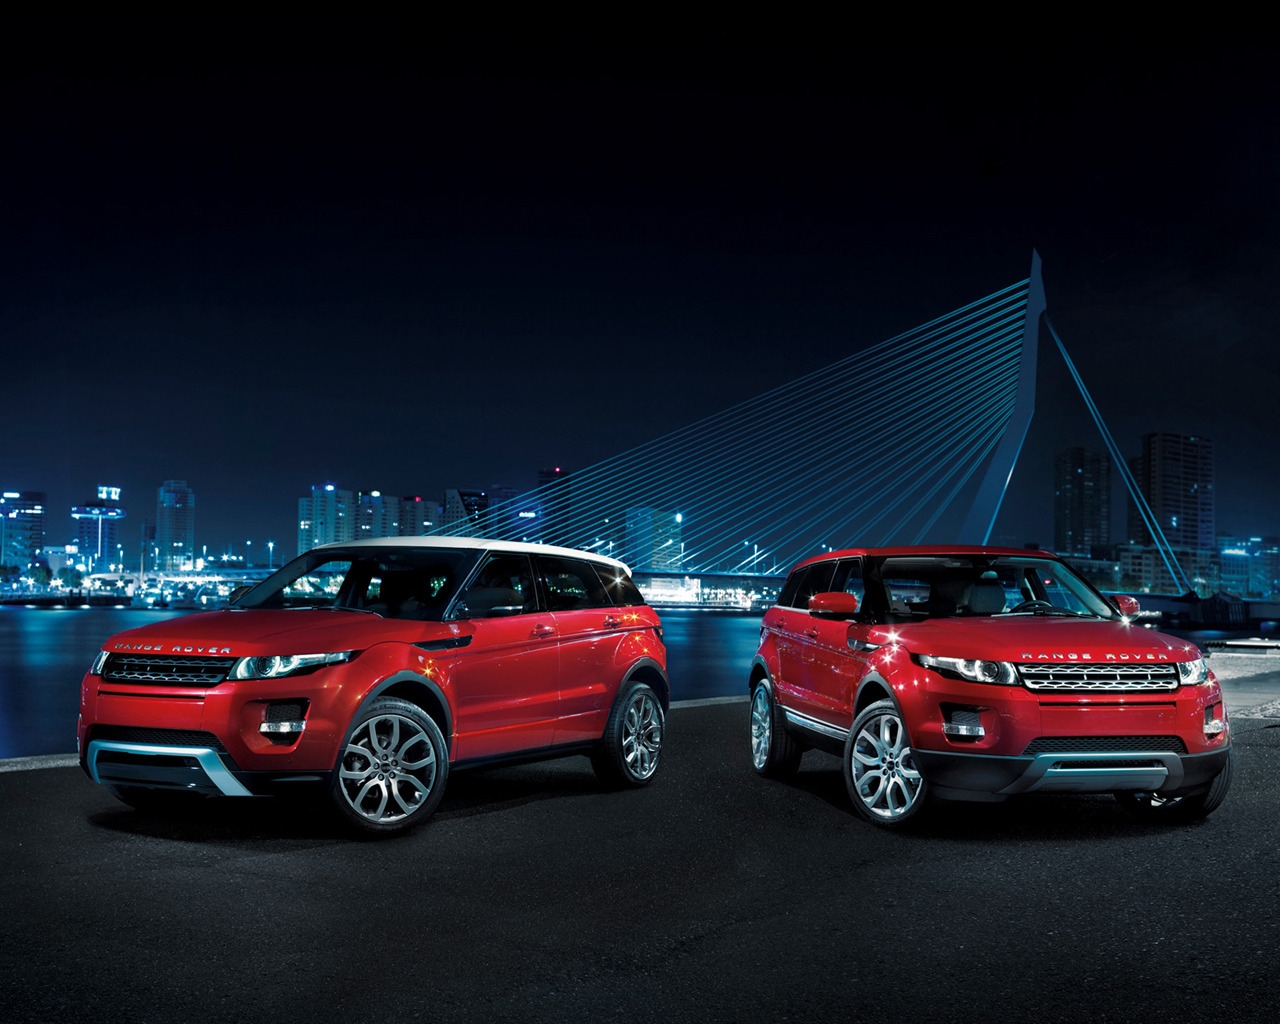 Range Rover Evoque Duo for 1280 x 1024 resolution